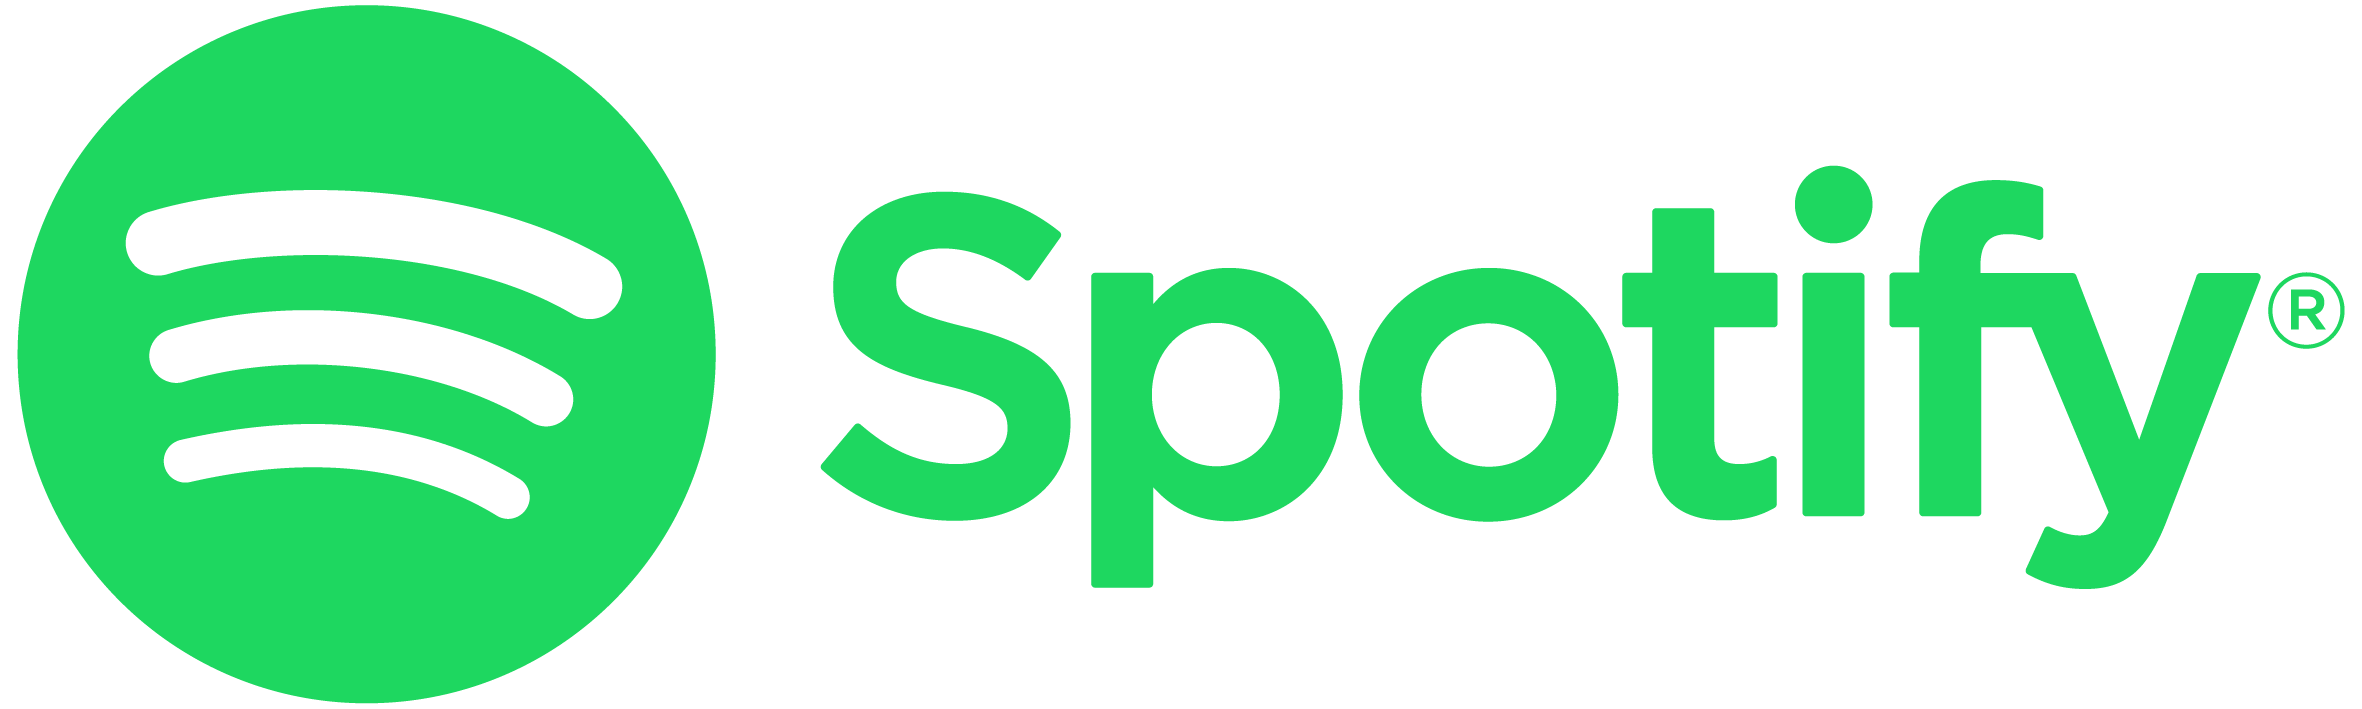 a green spotify logo with a black background